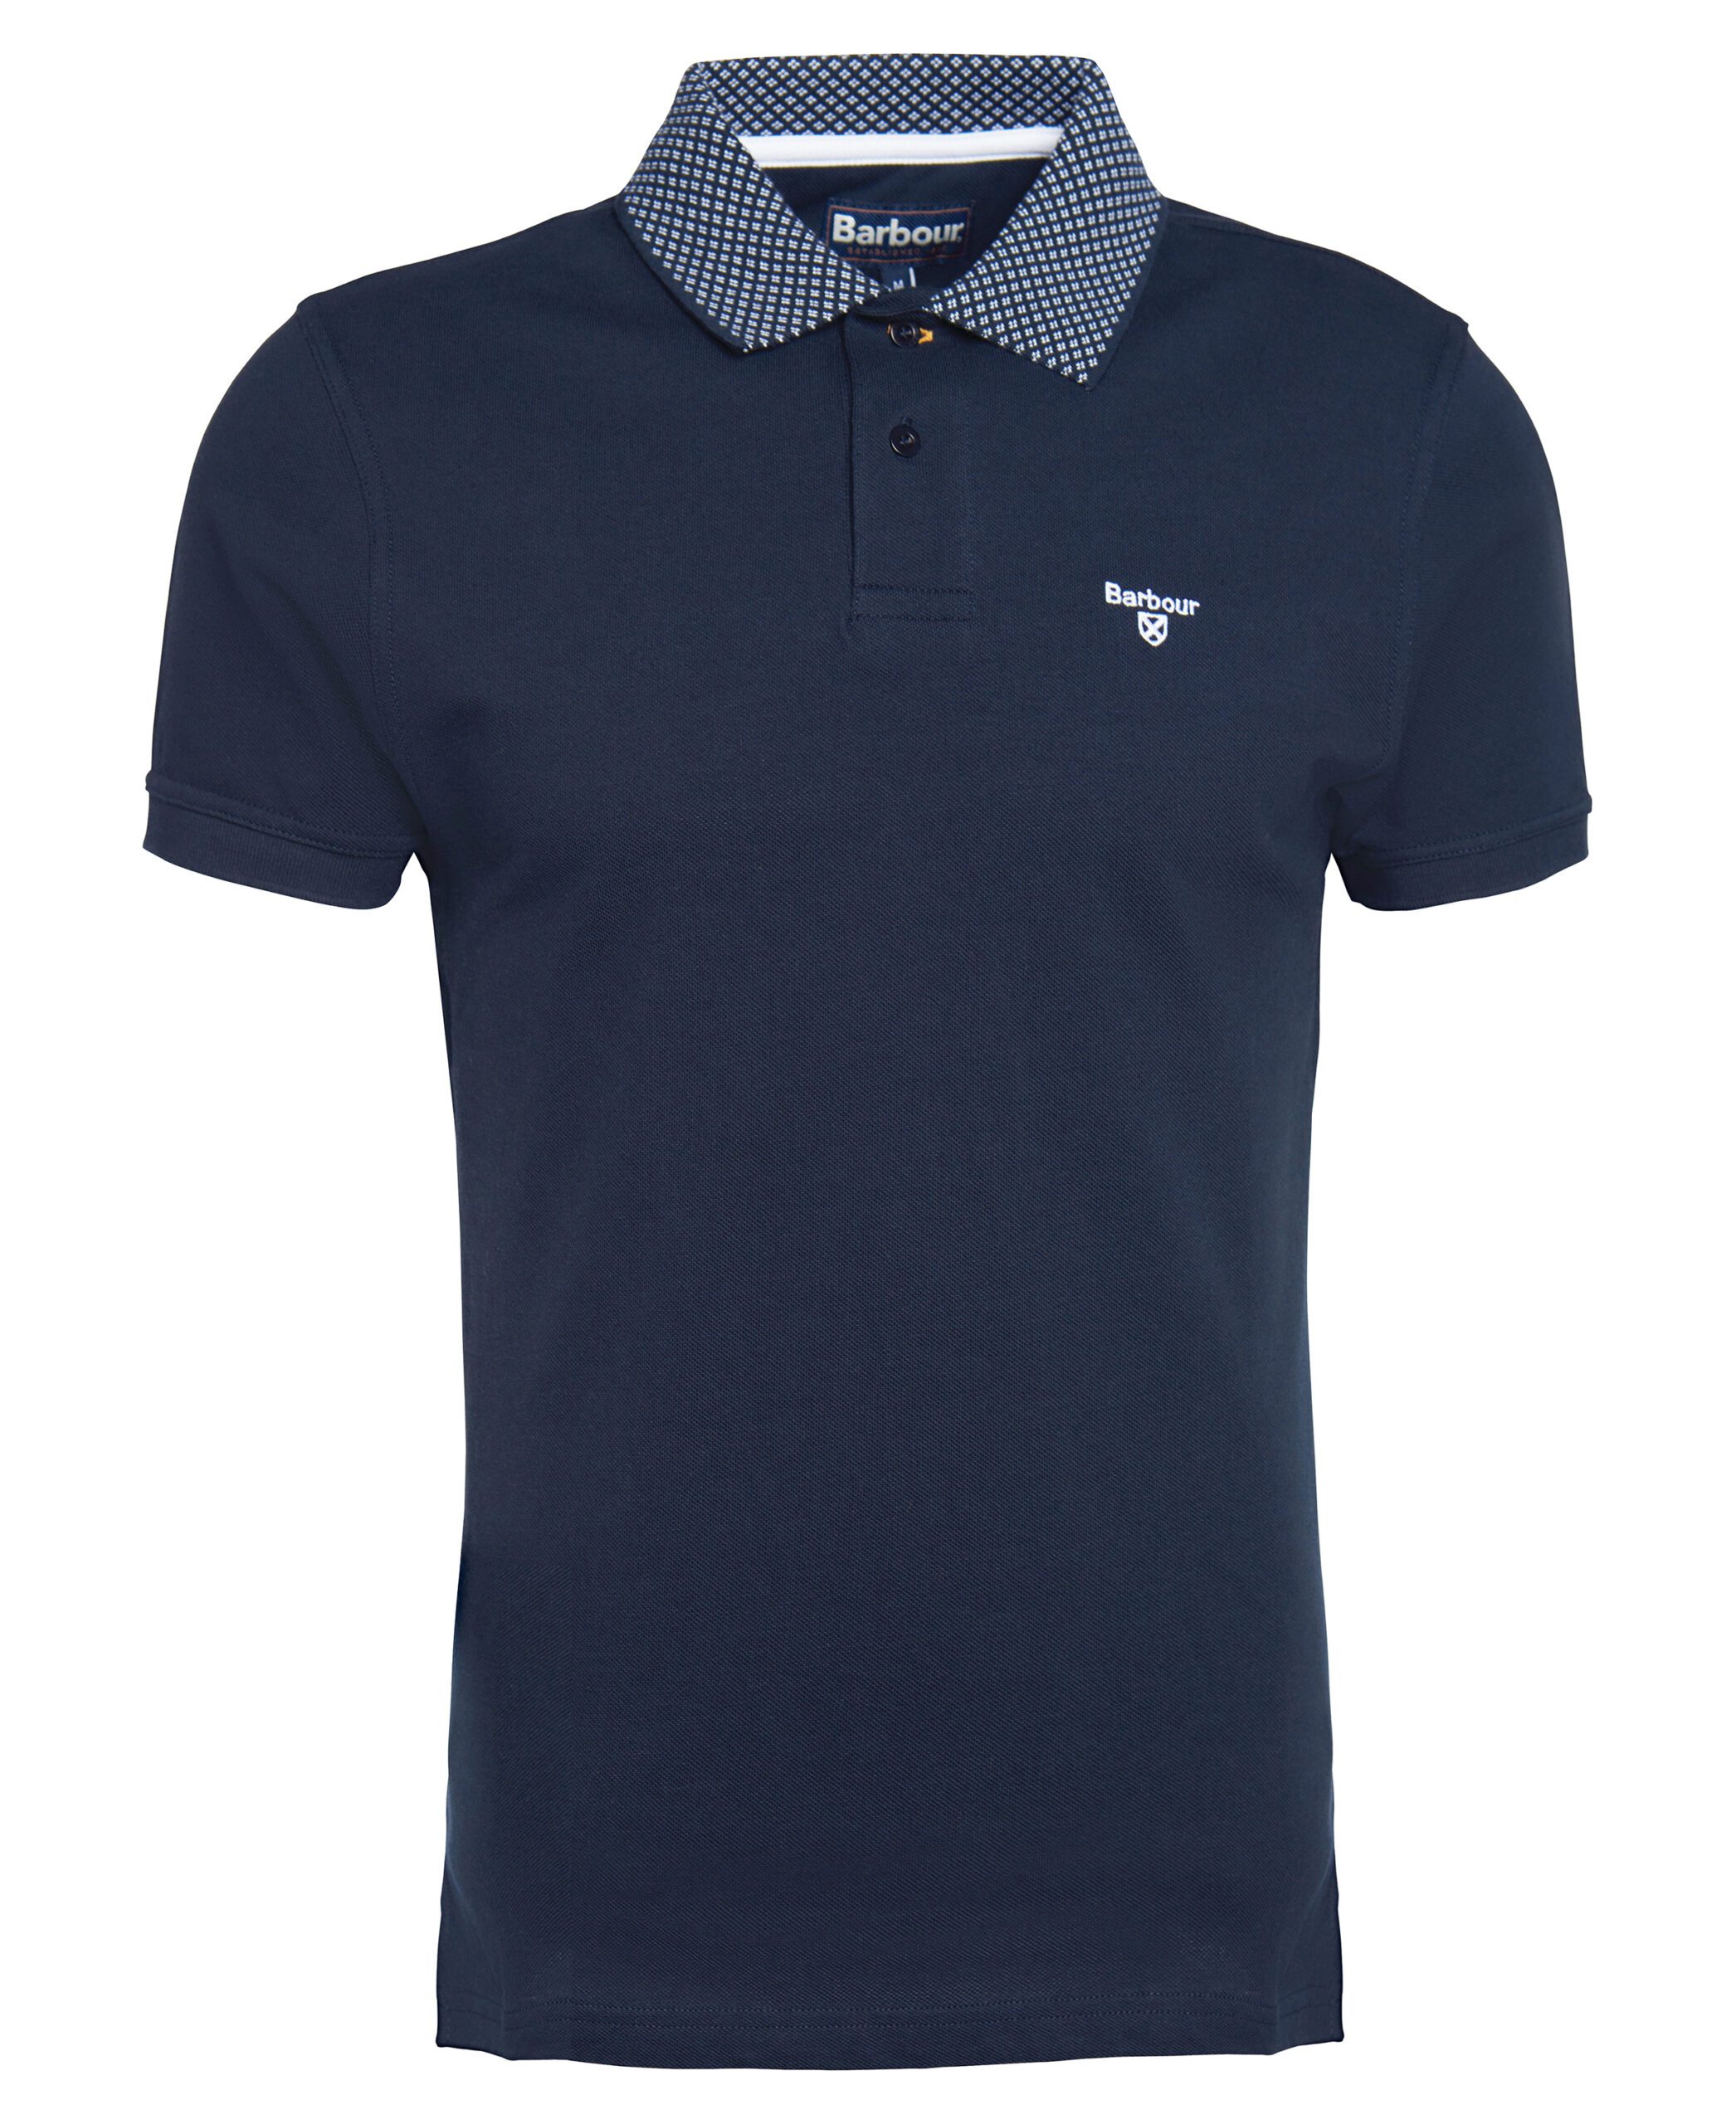 Barbour Barbour Bothain Polo Shirt Navy